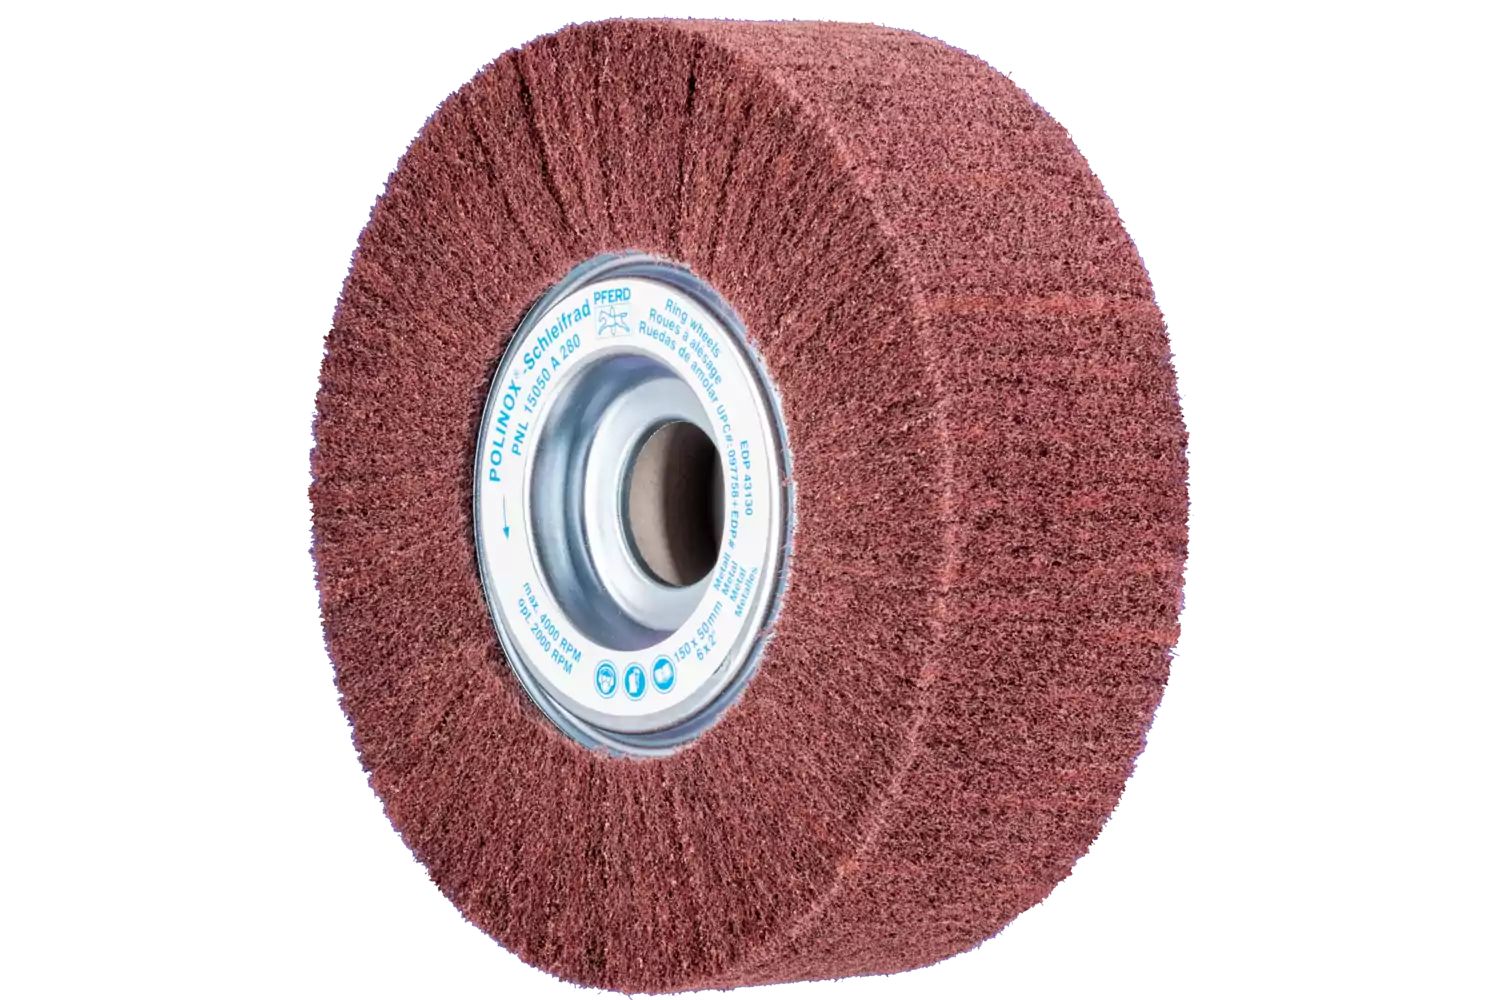 POLINOX non-woven unmounted grinding wheel PNL dia. 150x50 mm centre hole dia. 25.4 mm A280 for fine grinding and finishing 1